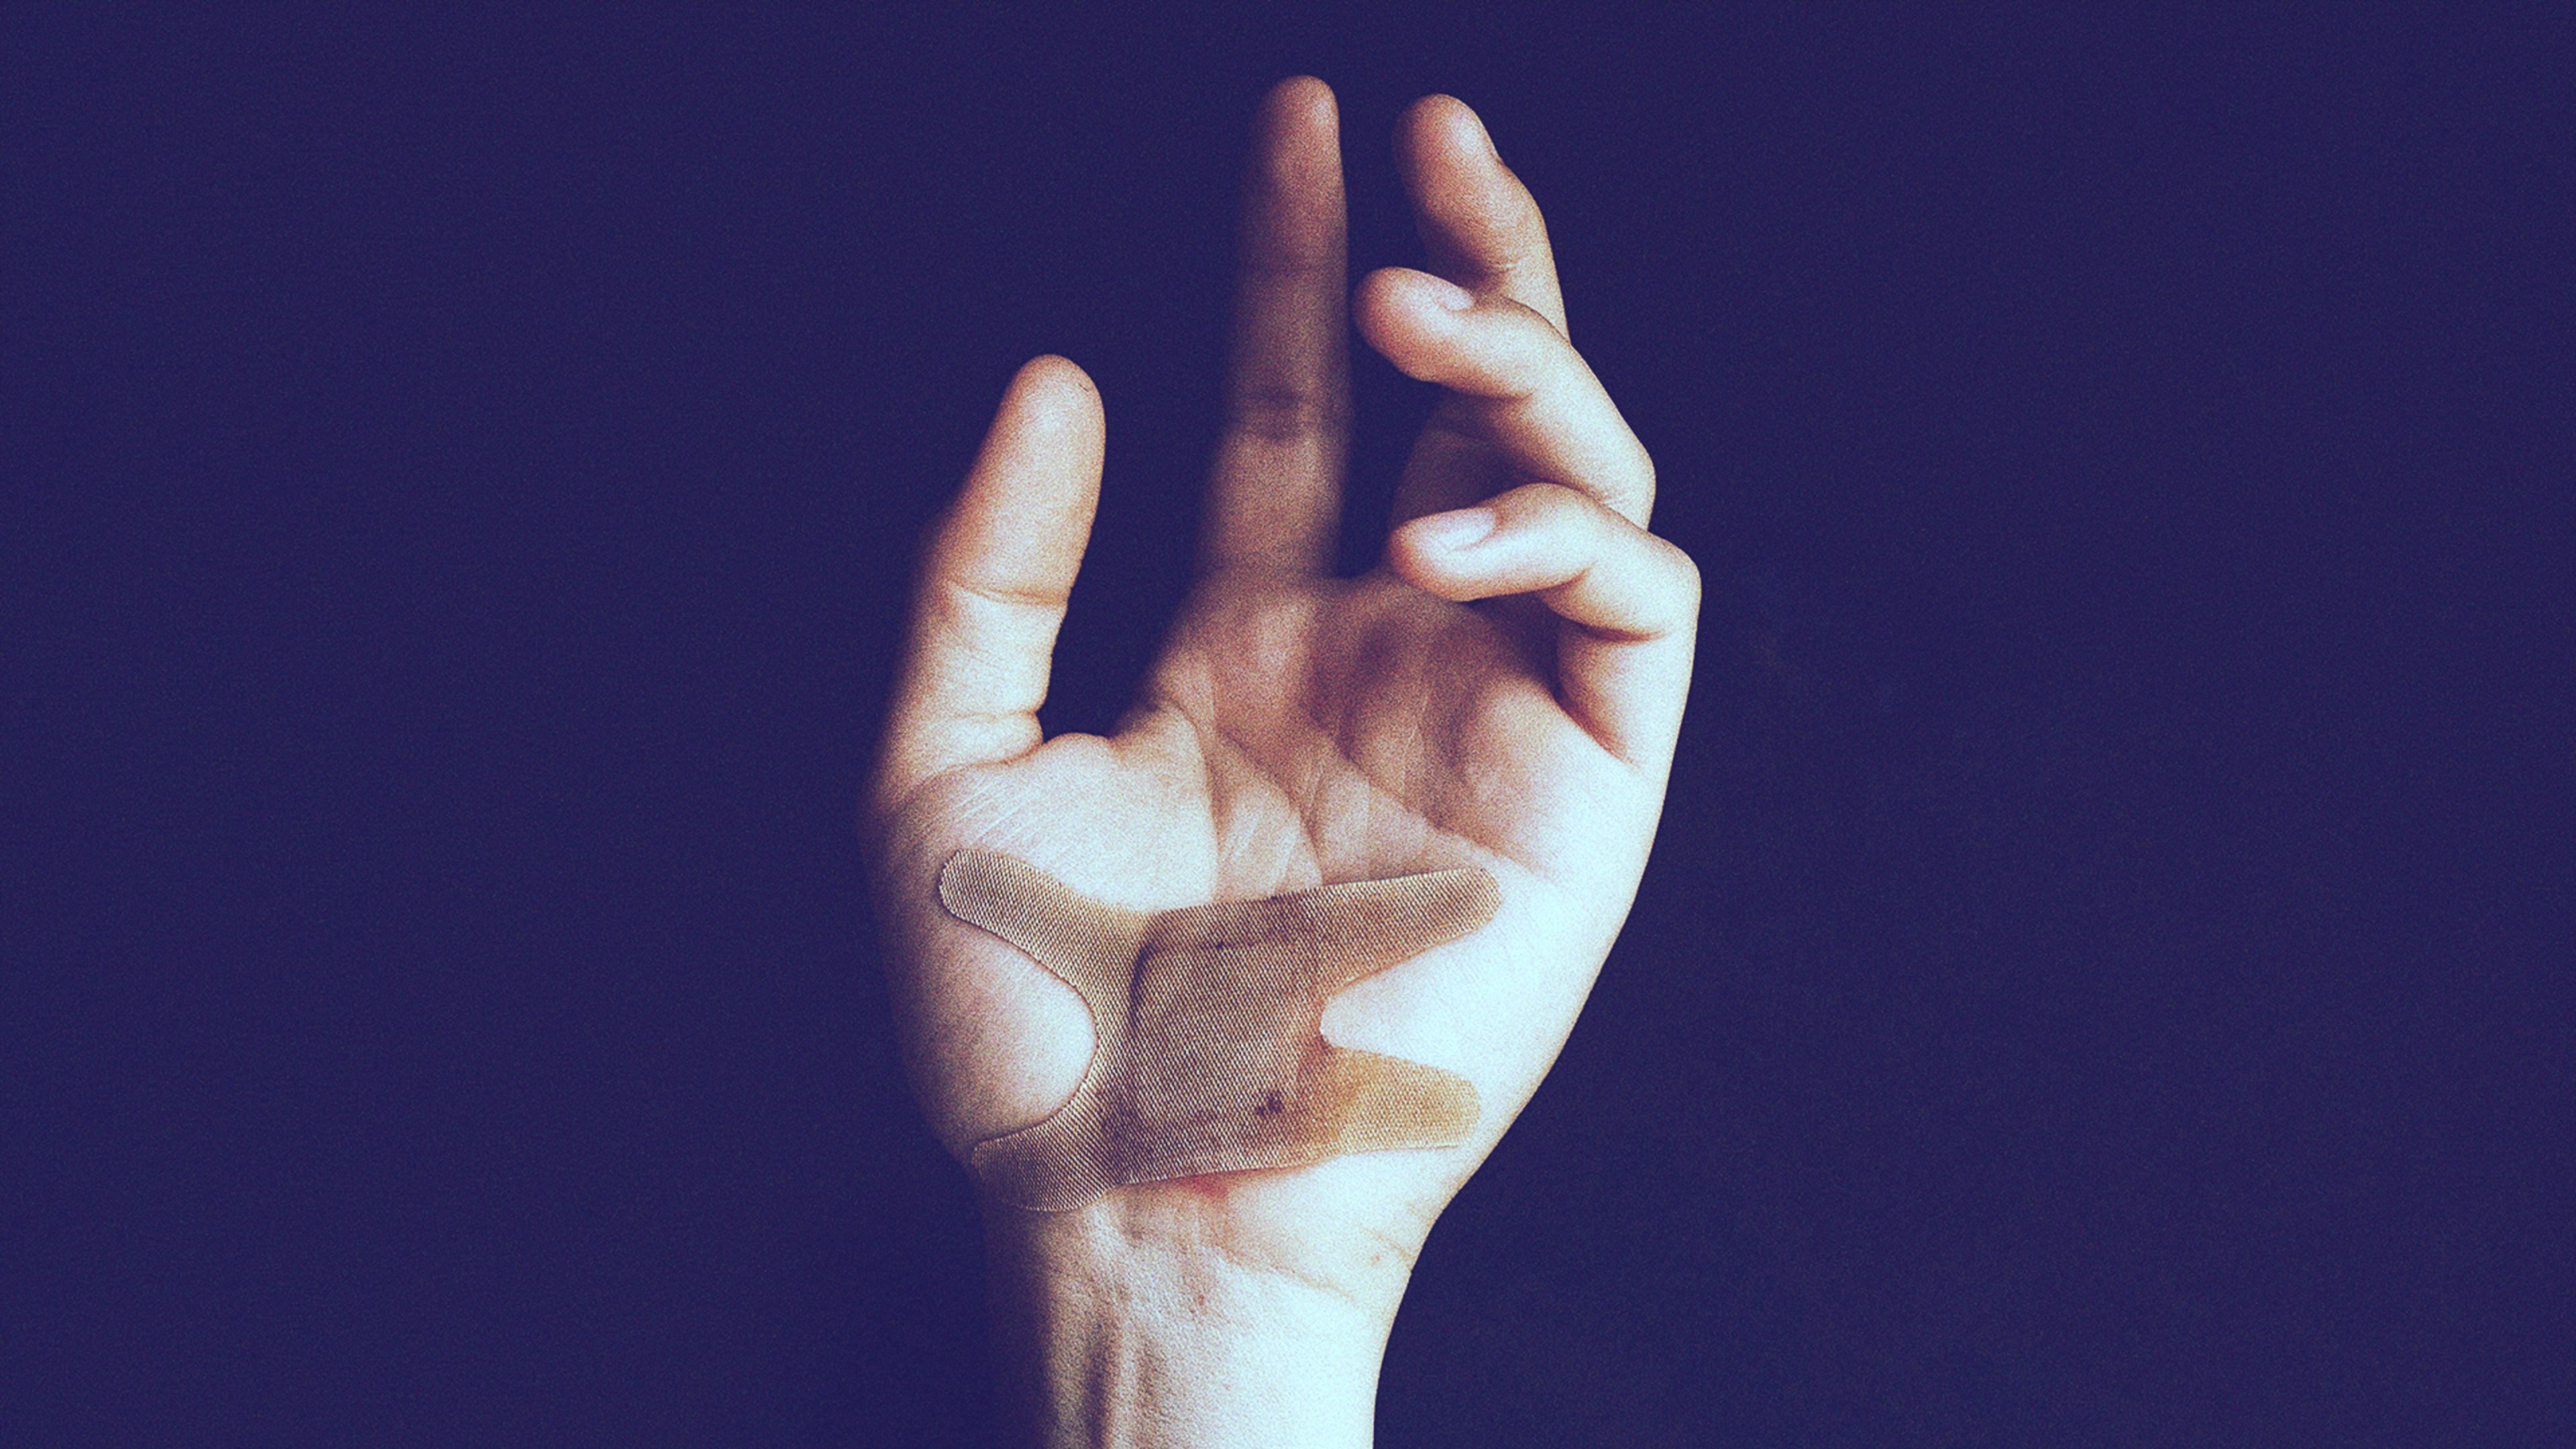 Band-Aid of the future? These high-tech bandages speed up the healing process